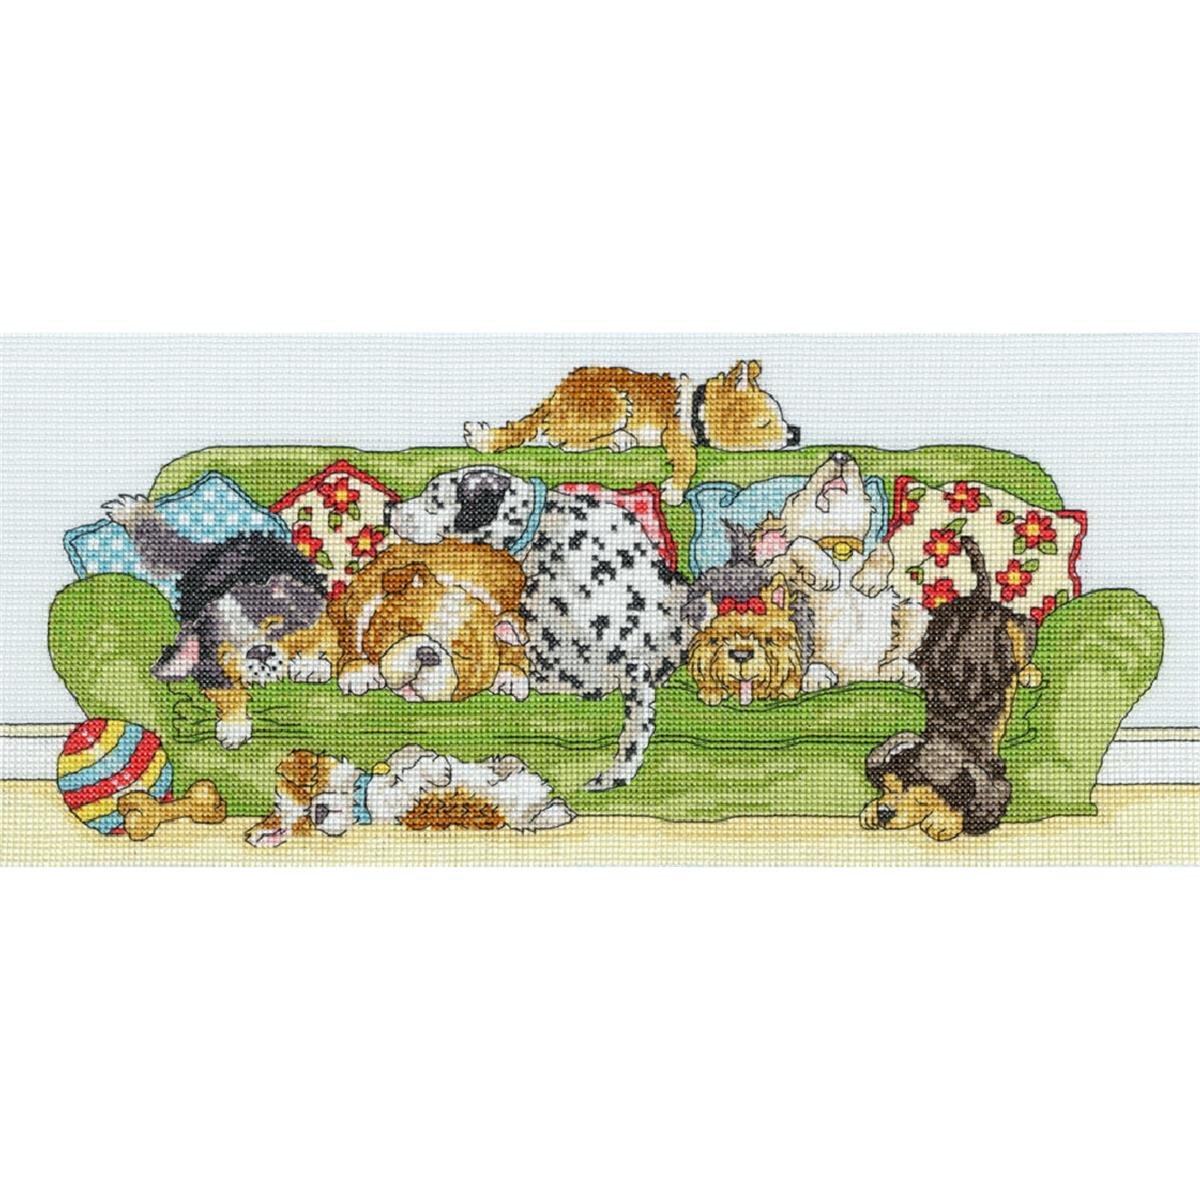 A colorful embroidery pack with seven playful puppies...